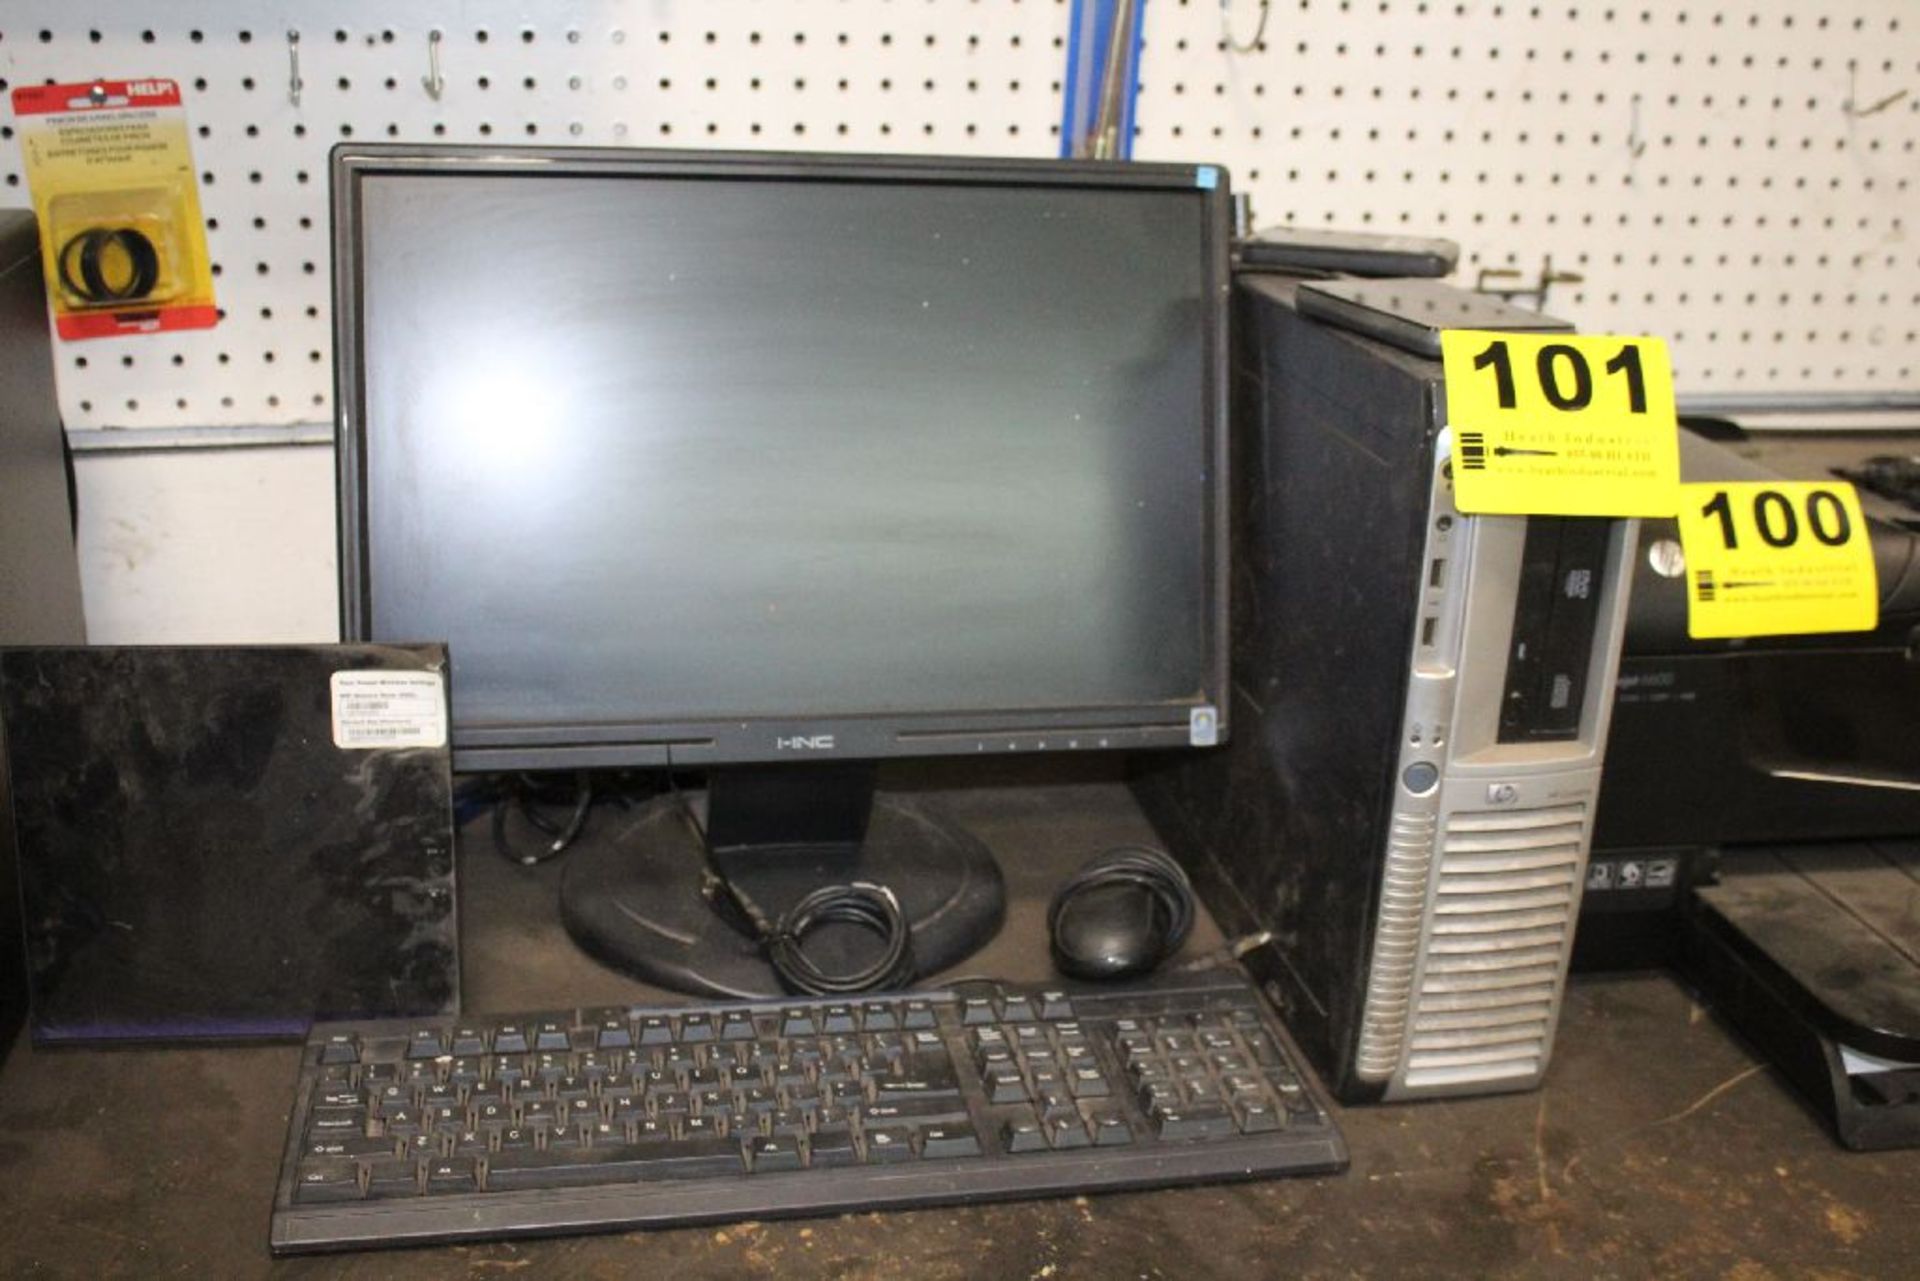 HP DESKTOP COMPUTER WITH FLATSCREEN MONITOR, KEYBOARD AND MOUSE